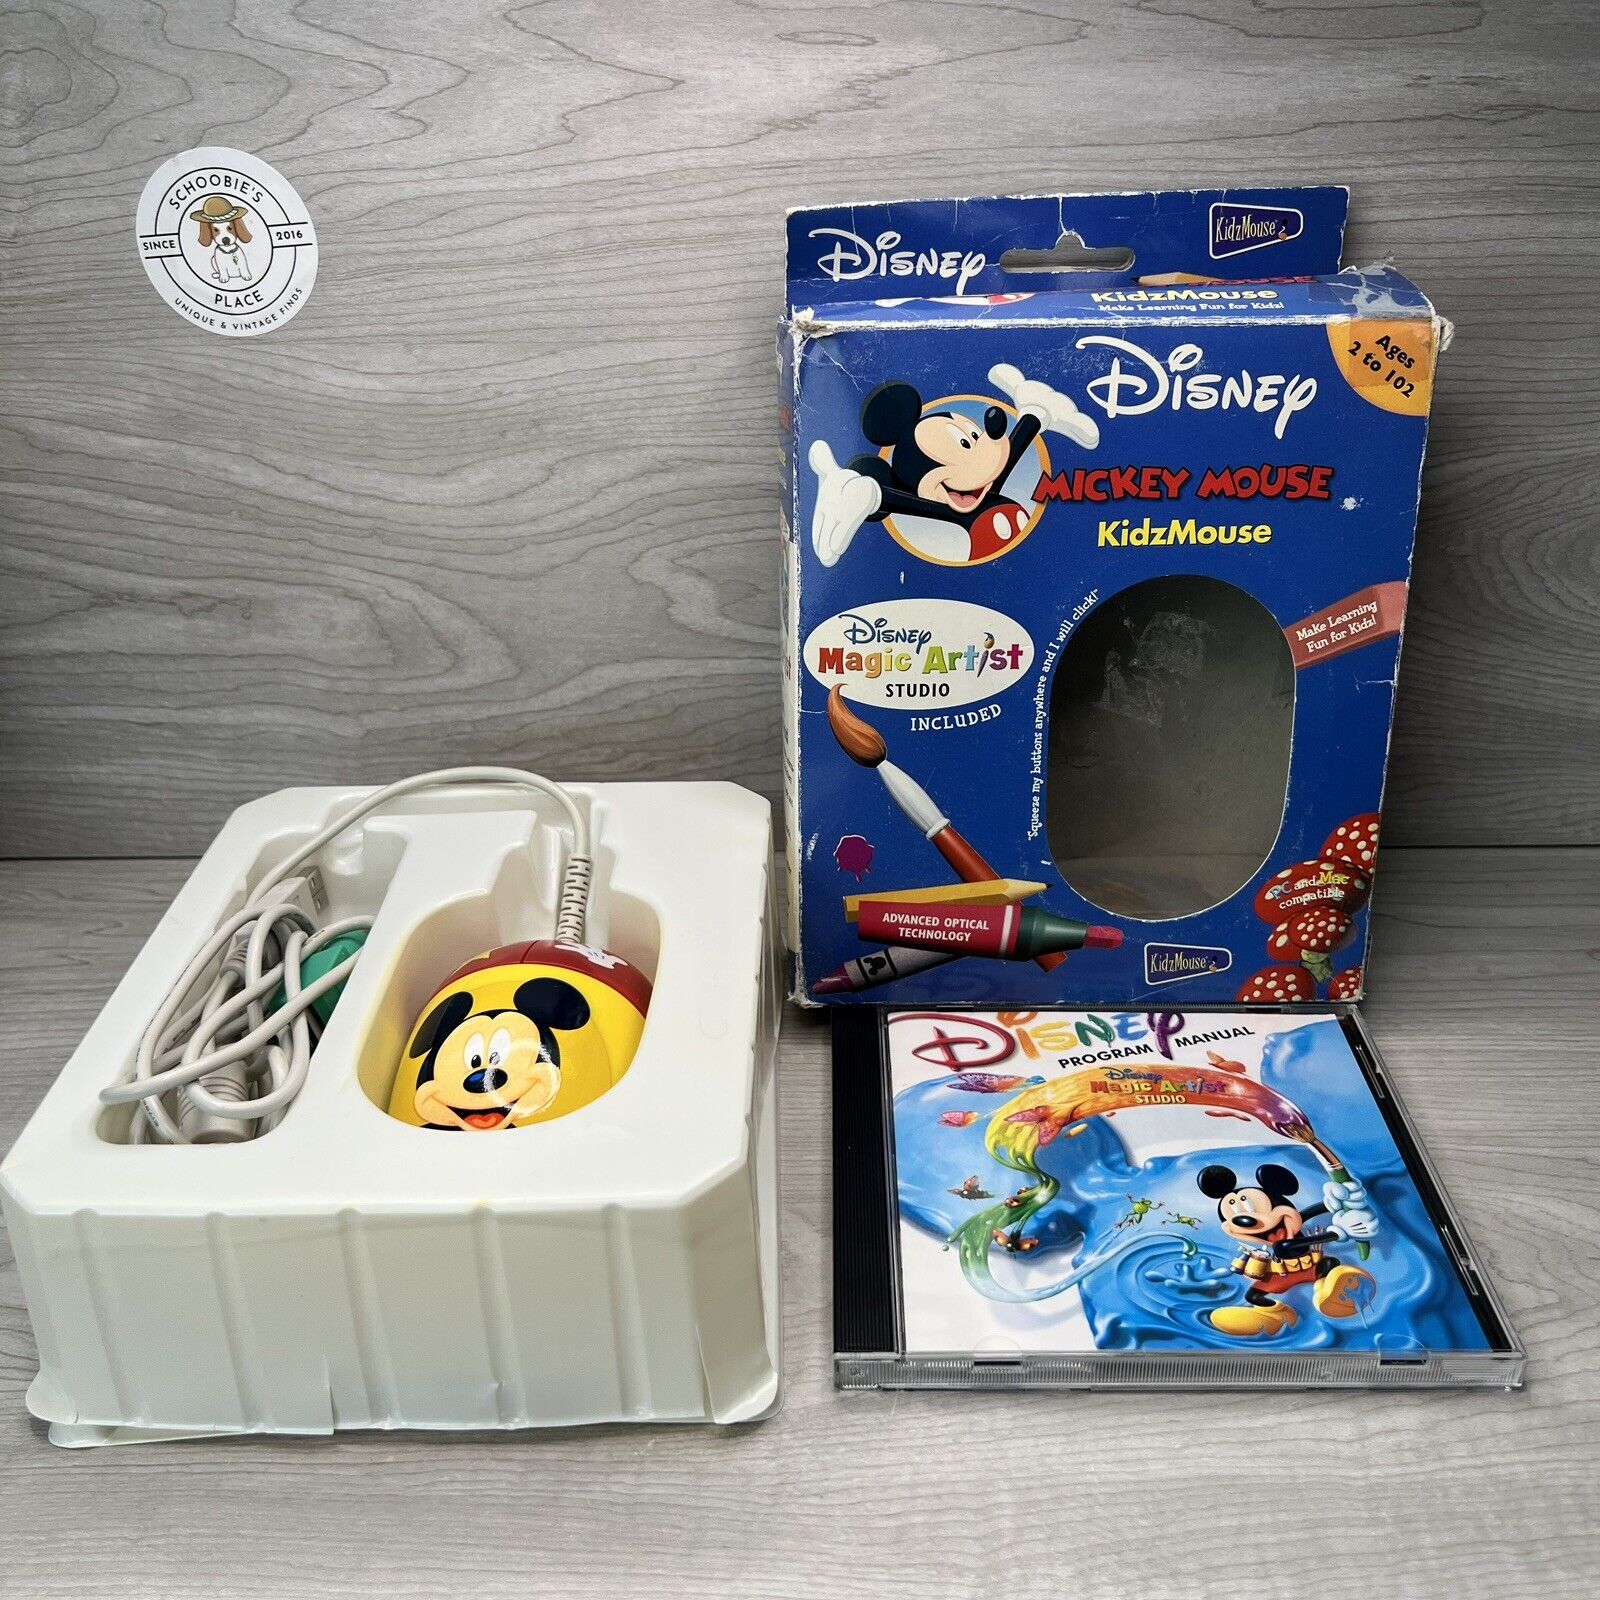 Vintage Disney Mickey Mouse Wired Computer Mouse KidzMouse PC MAC Rare 2003 USED